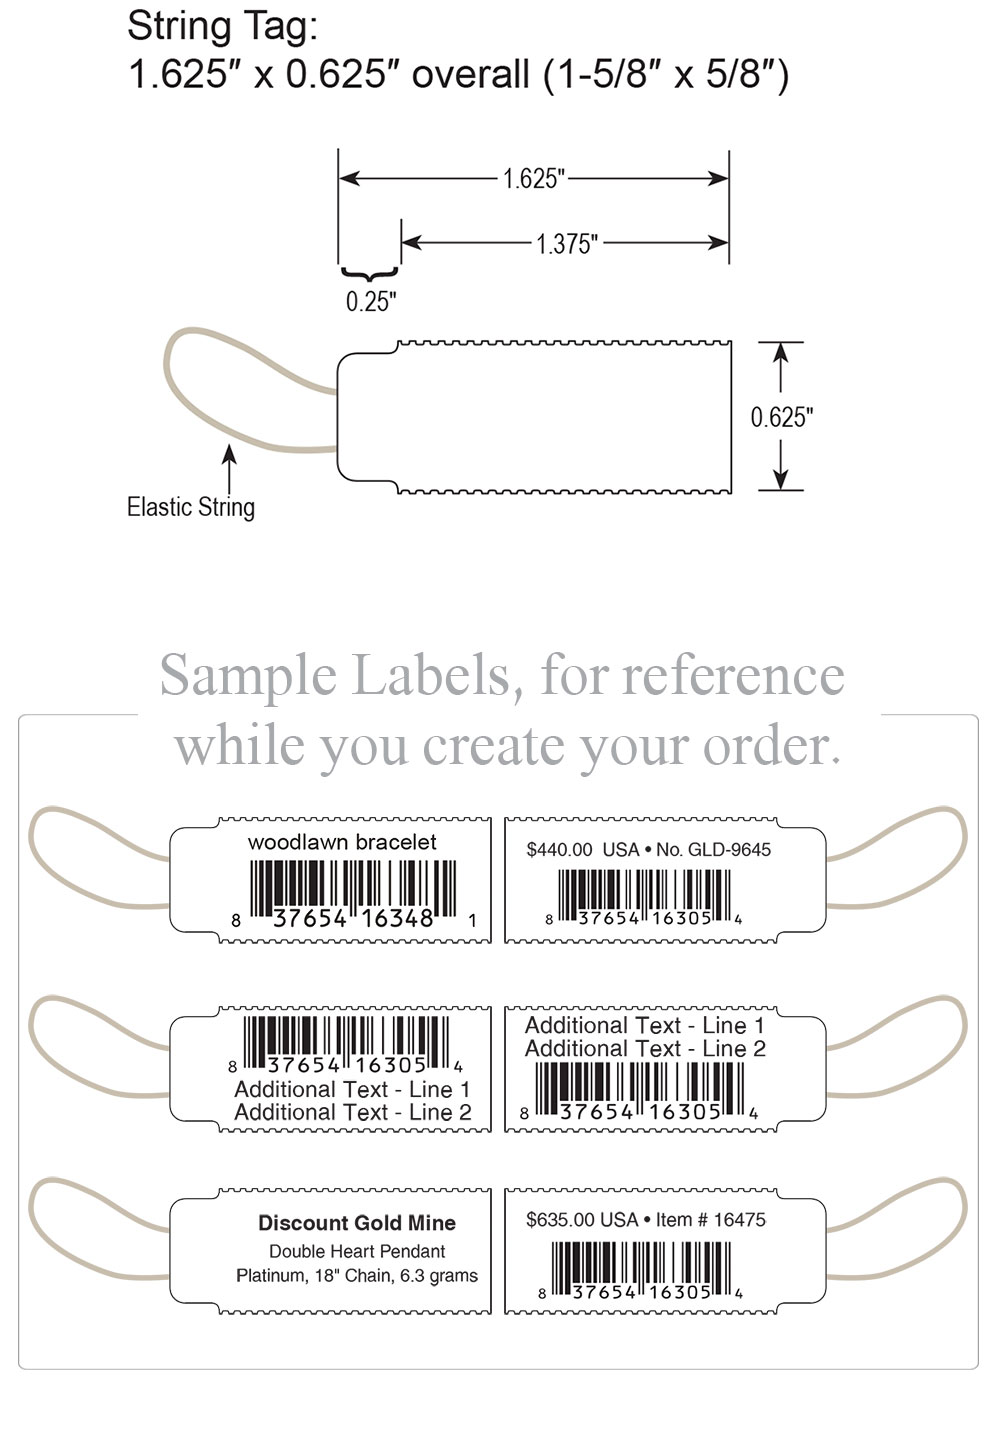 Elastic String Tags - Jewelry Labels And Tags